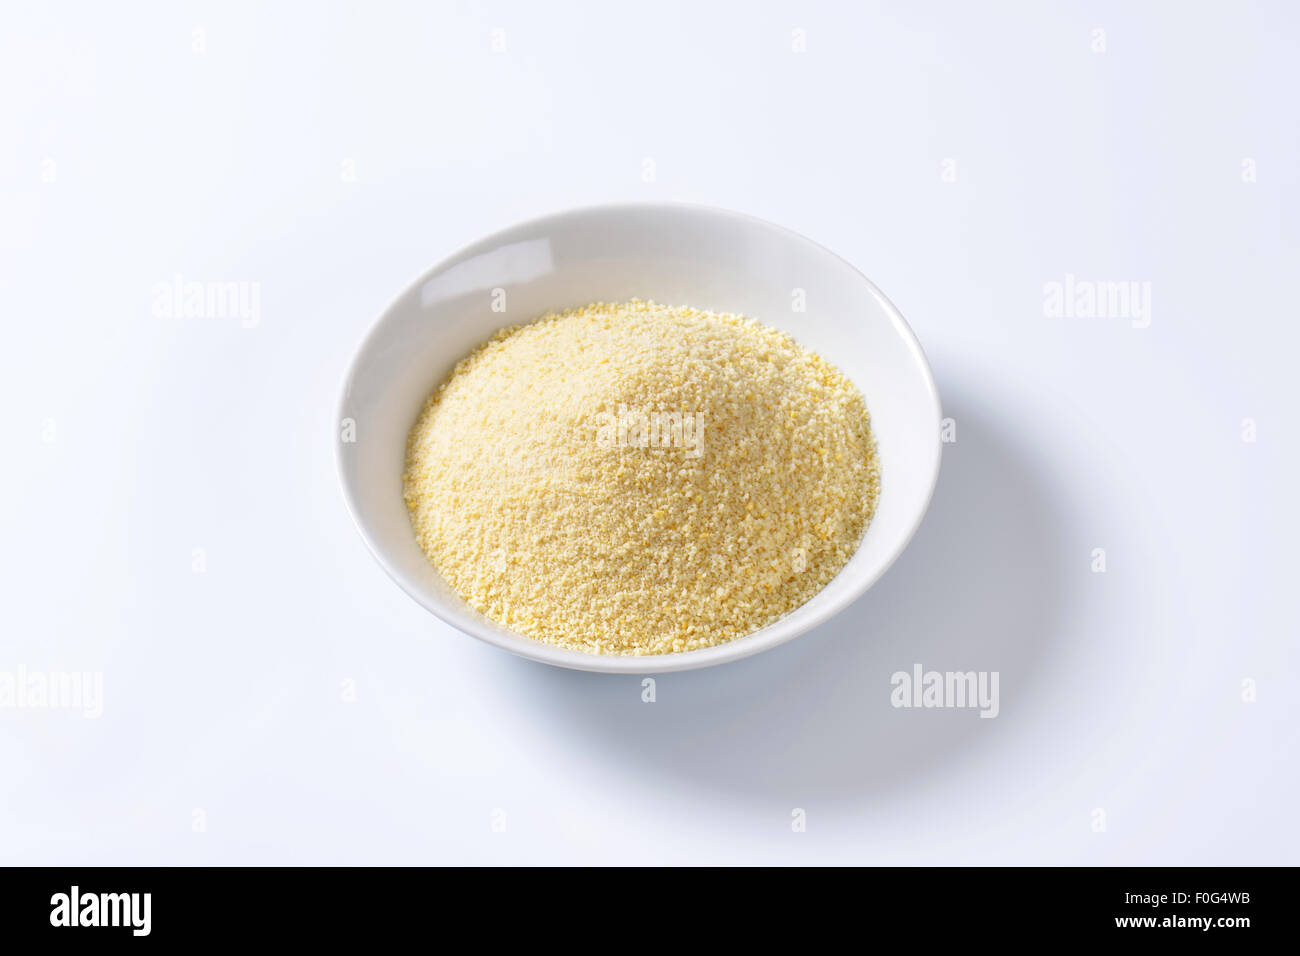 Pile of finely ground bread crumbs on plate Stock Photo